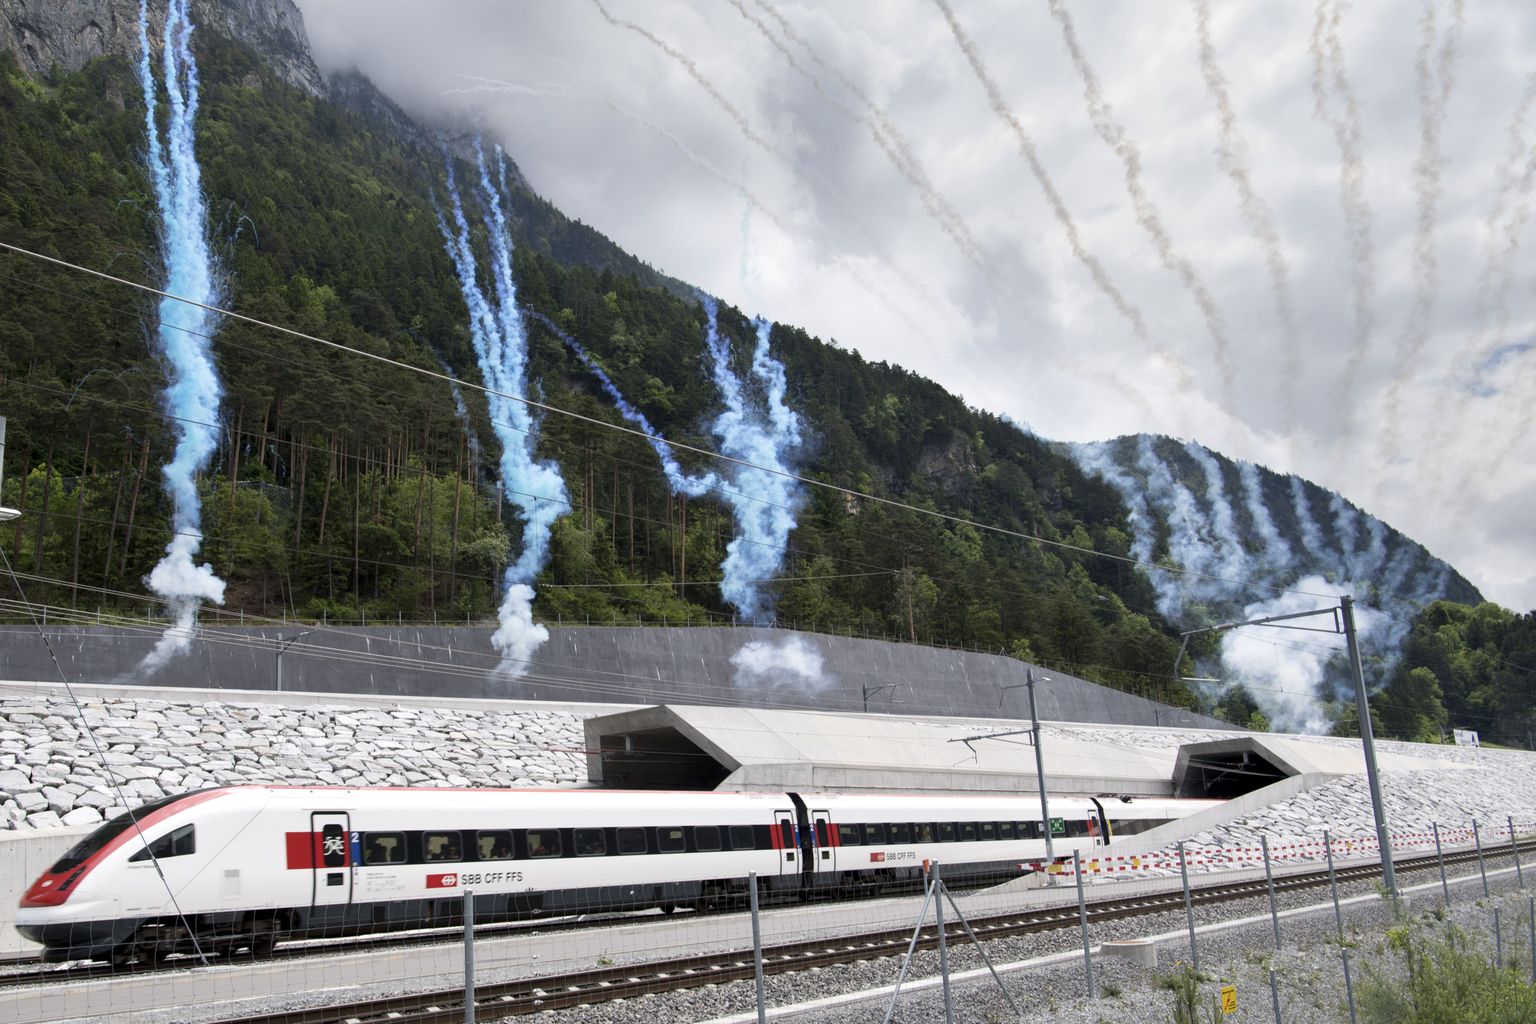 The first train comes out of the tunnel's North portal on the opening day of the Gotthard rail tunnel,  at the North portal near Erstfeld, Switzerland, Wednesday, June 1, 2016. The construction of the 57 kilometer long tunnel began in 1999, the breakthrough was in 2010. After the official opening on June 1, the commercial operation will begin in  December 2016. (Laurent Gillieron/Keystone via AP)